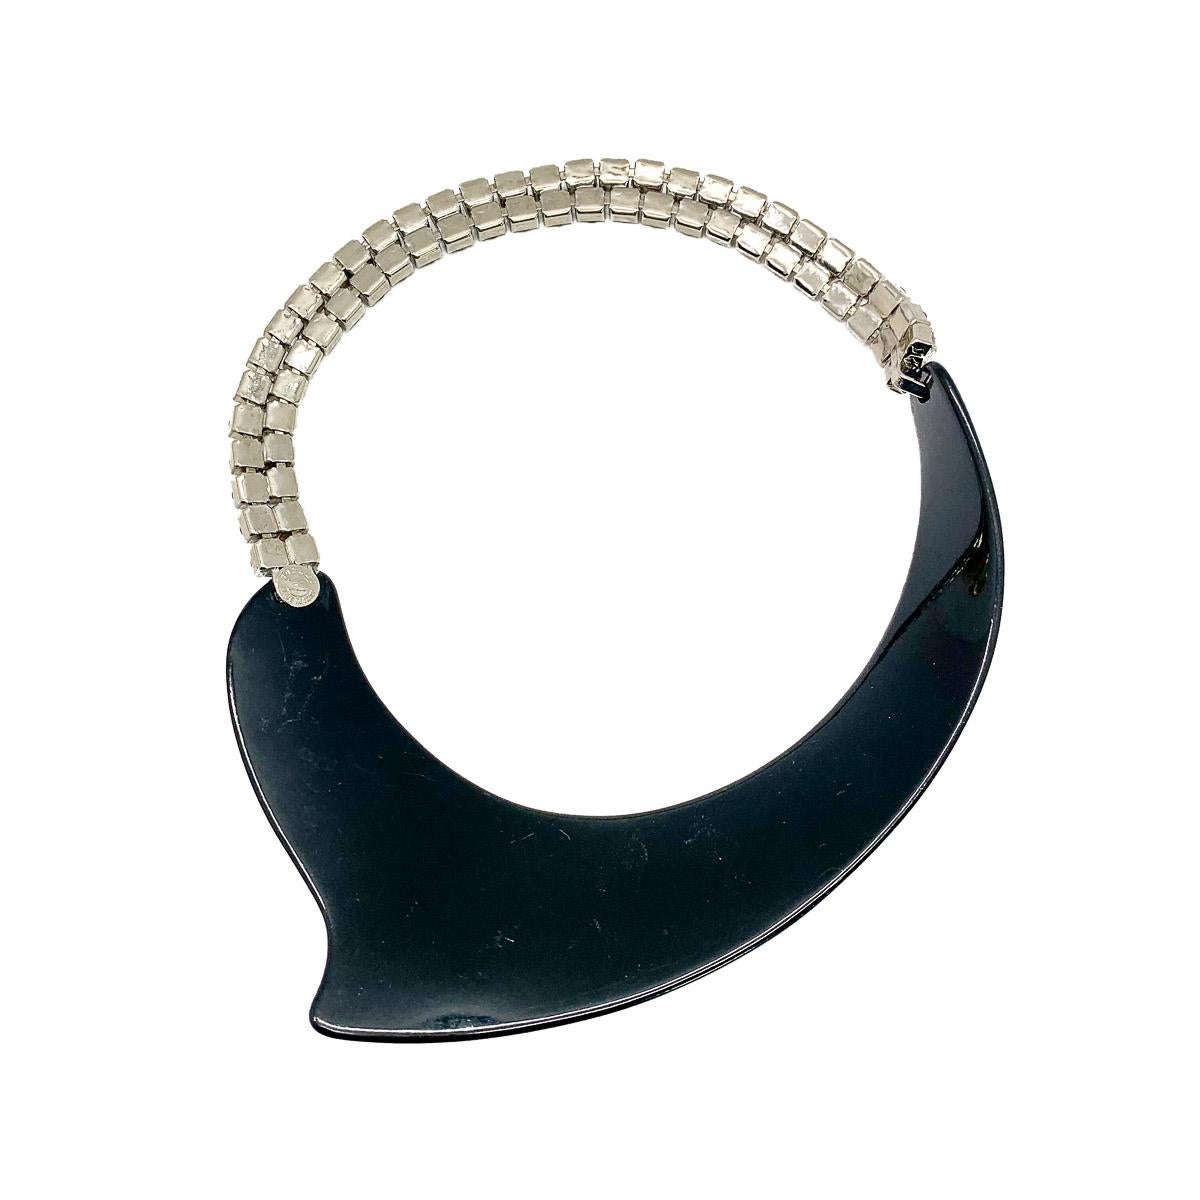 A superb Vintage Bijoux Deco Collar. From the Italian jewellery maker BIJOUX. The husband and wife team, Lucio and Emy Manca first began making exceptionally stylish costume jewellery in 1956 and established their brand BIJOUX Italy, which remains